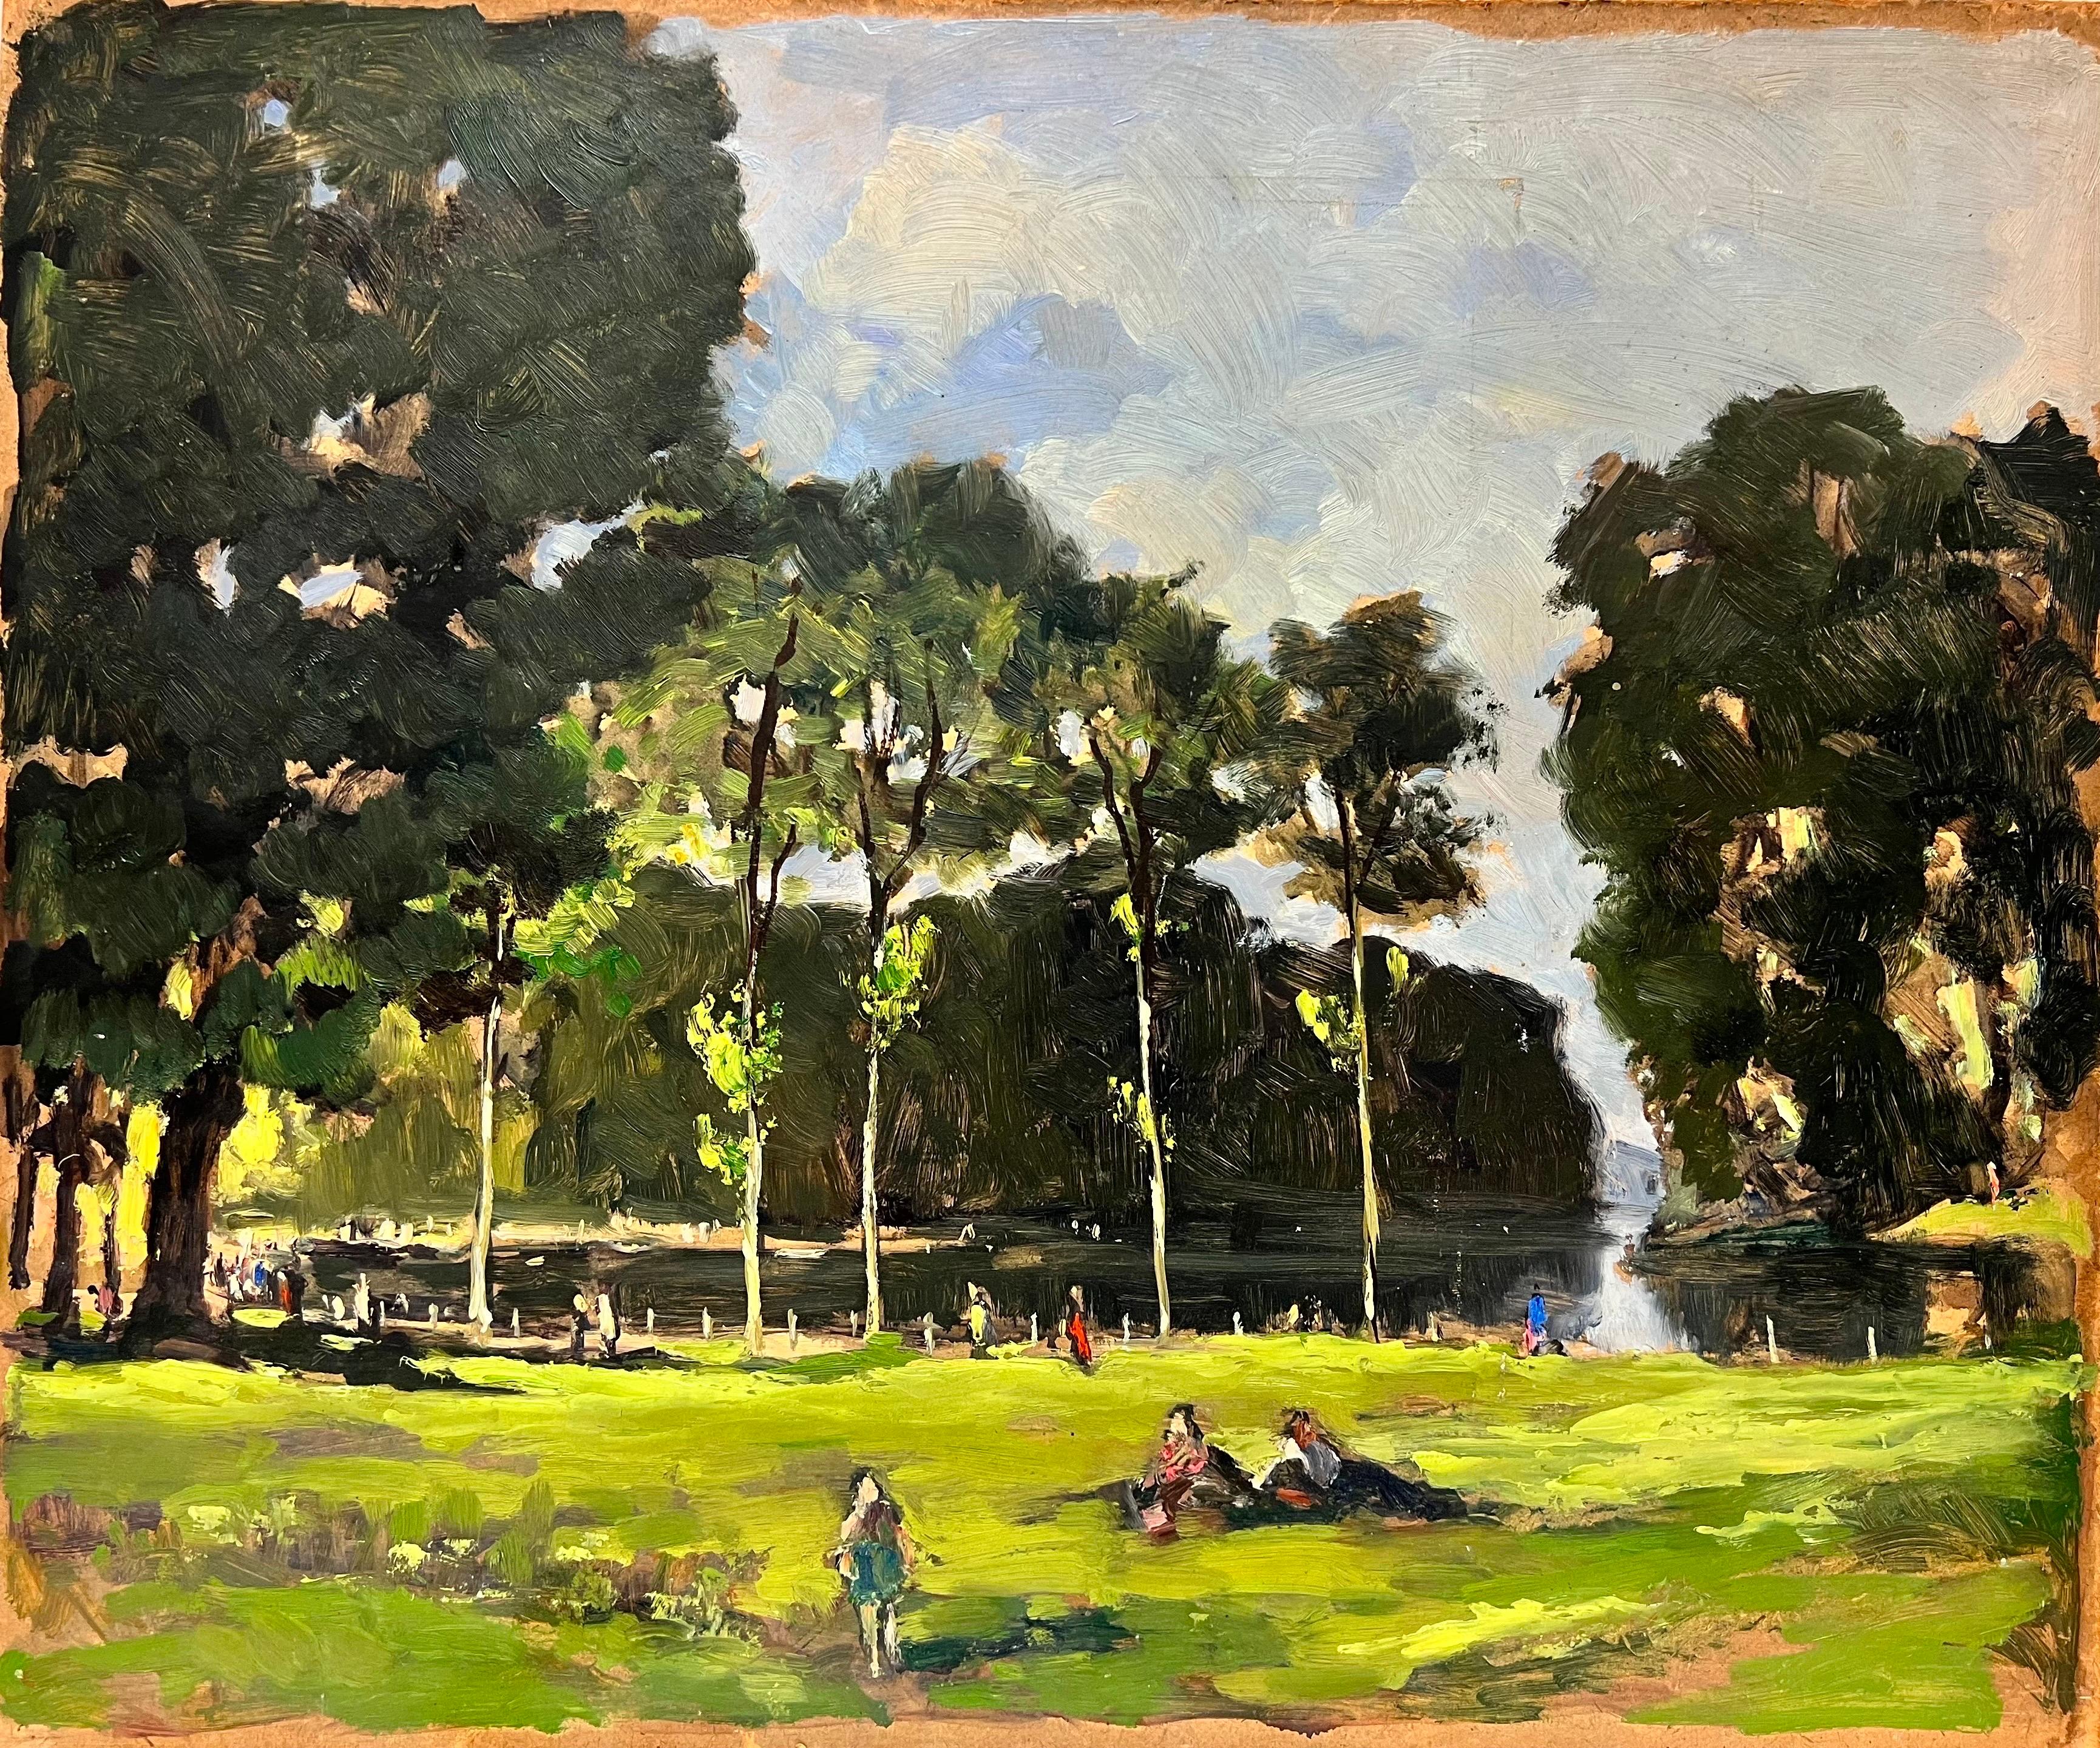 Amédée Boucher  Landscape Painting - 1950's French Impressionist Oil Figures Enjoying Picnic by Lake, Green meadows